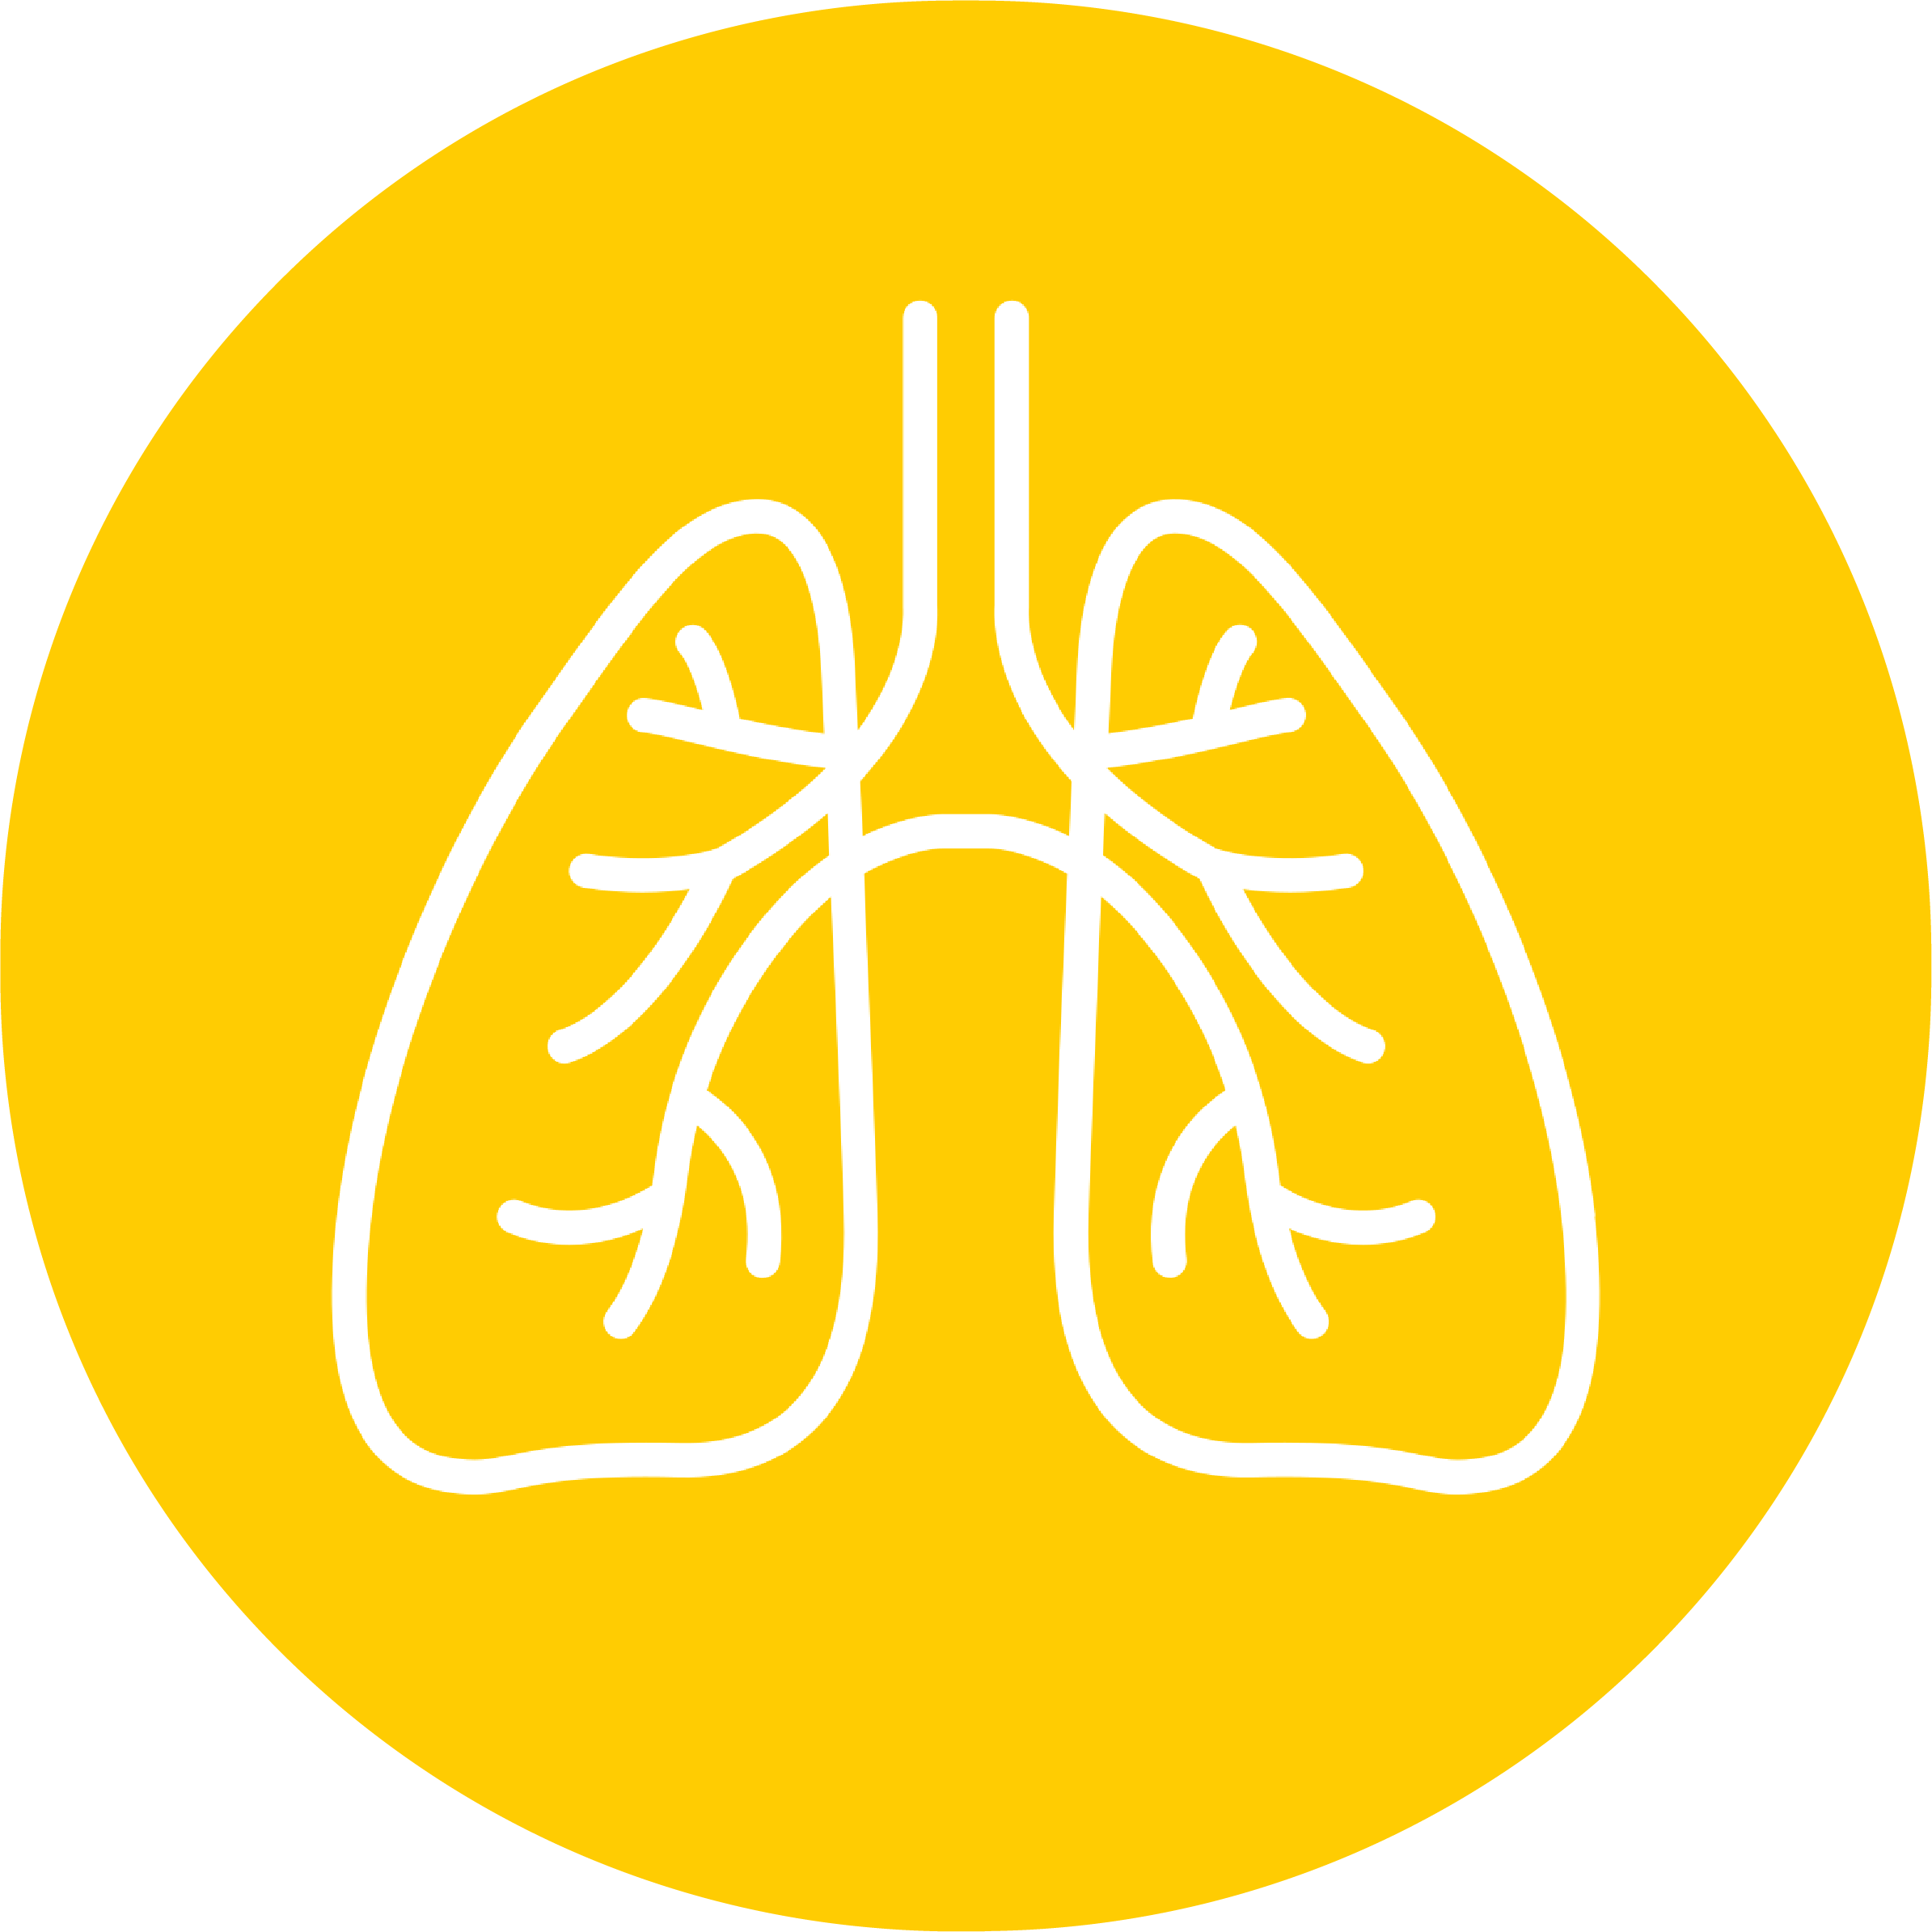 Navigation icon of lungs representing respiratory diseases